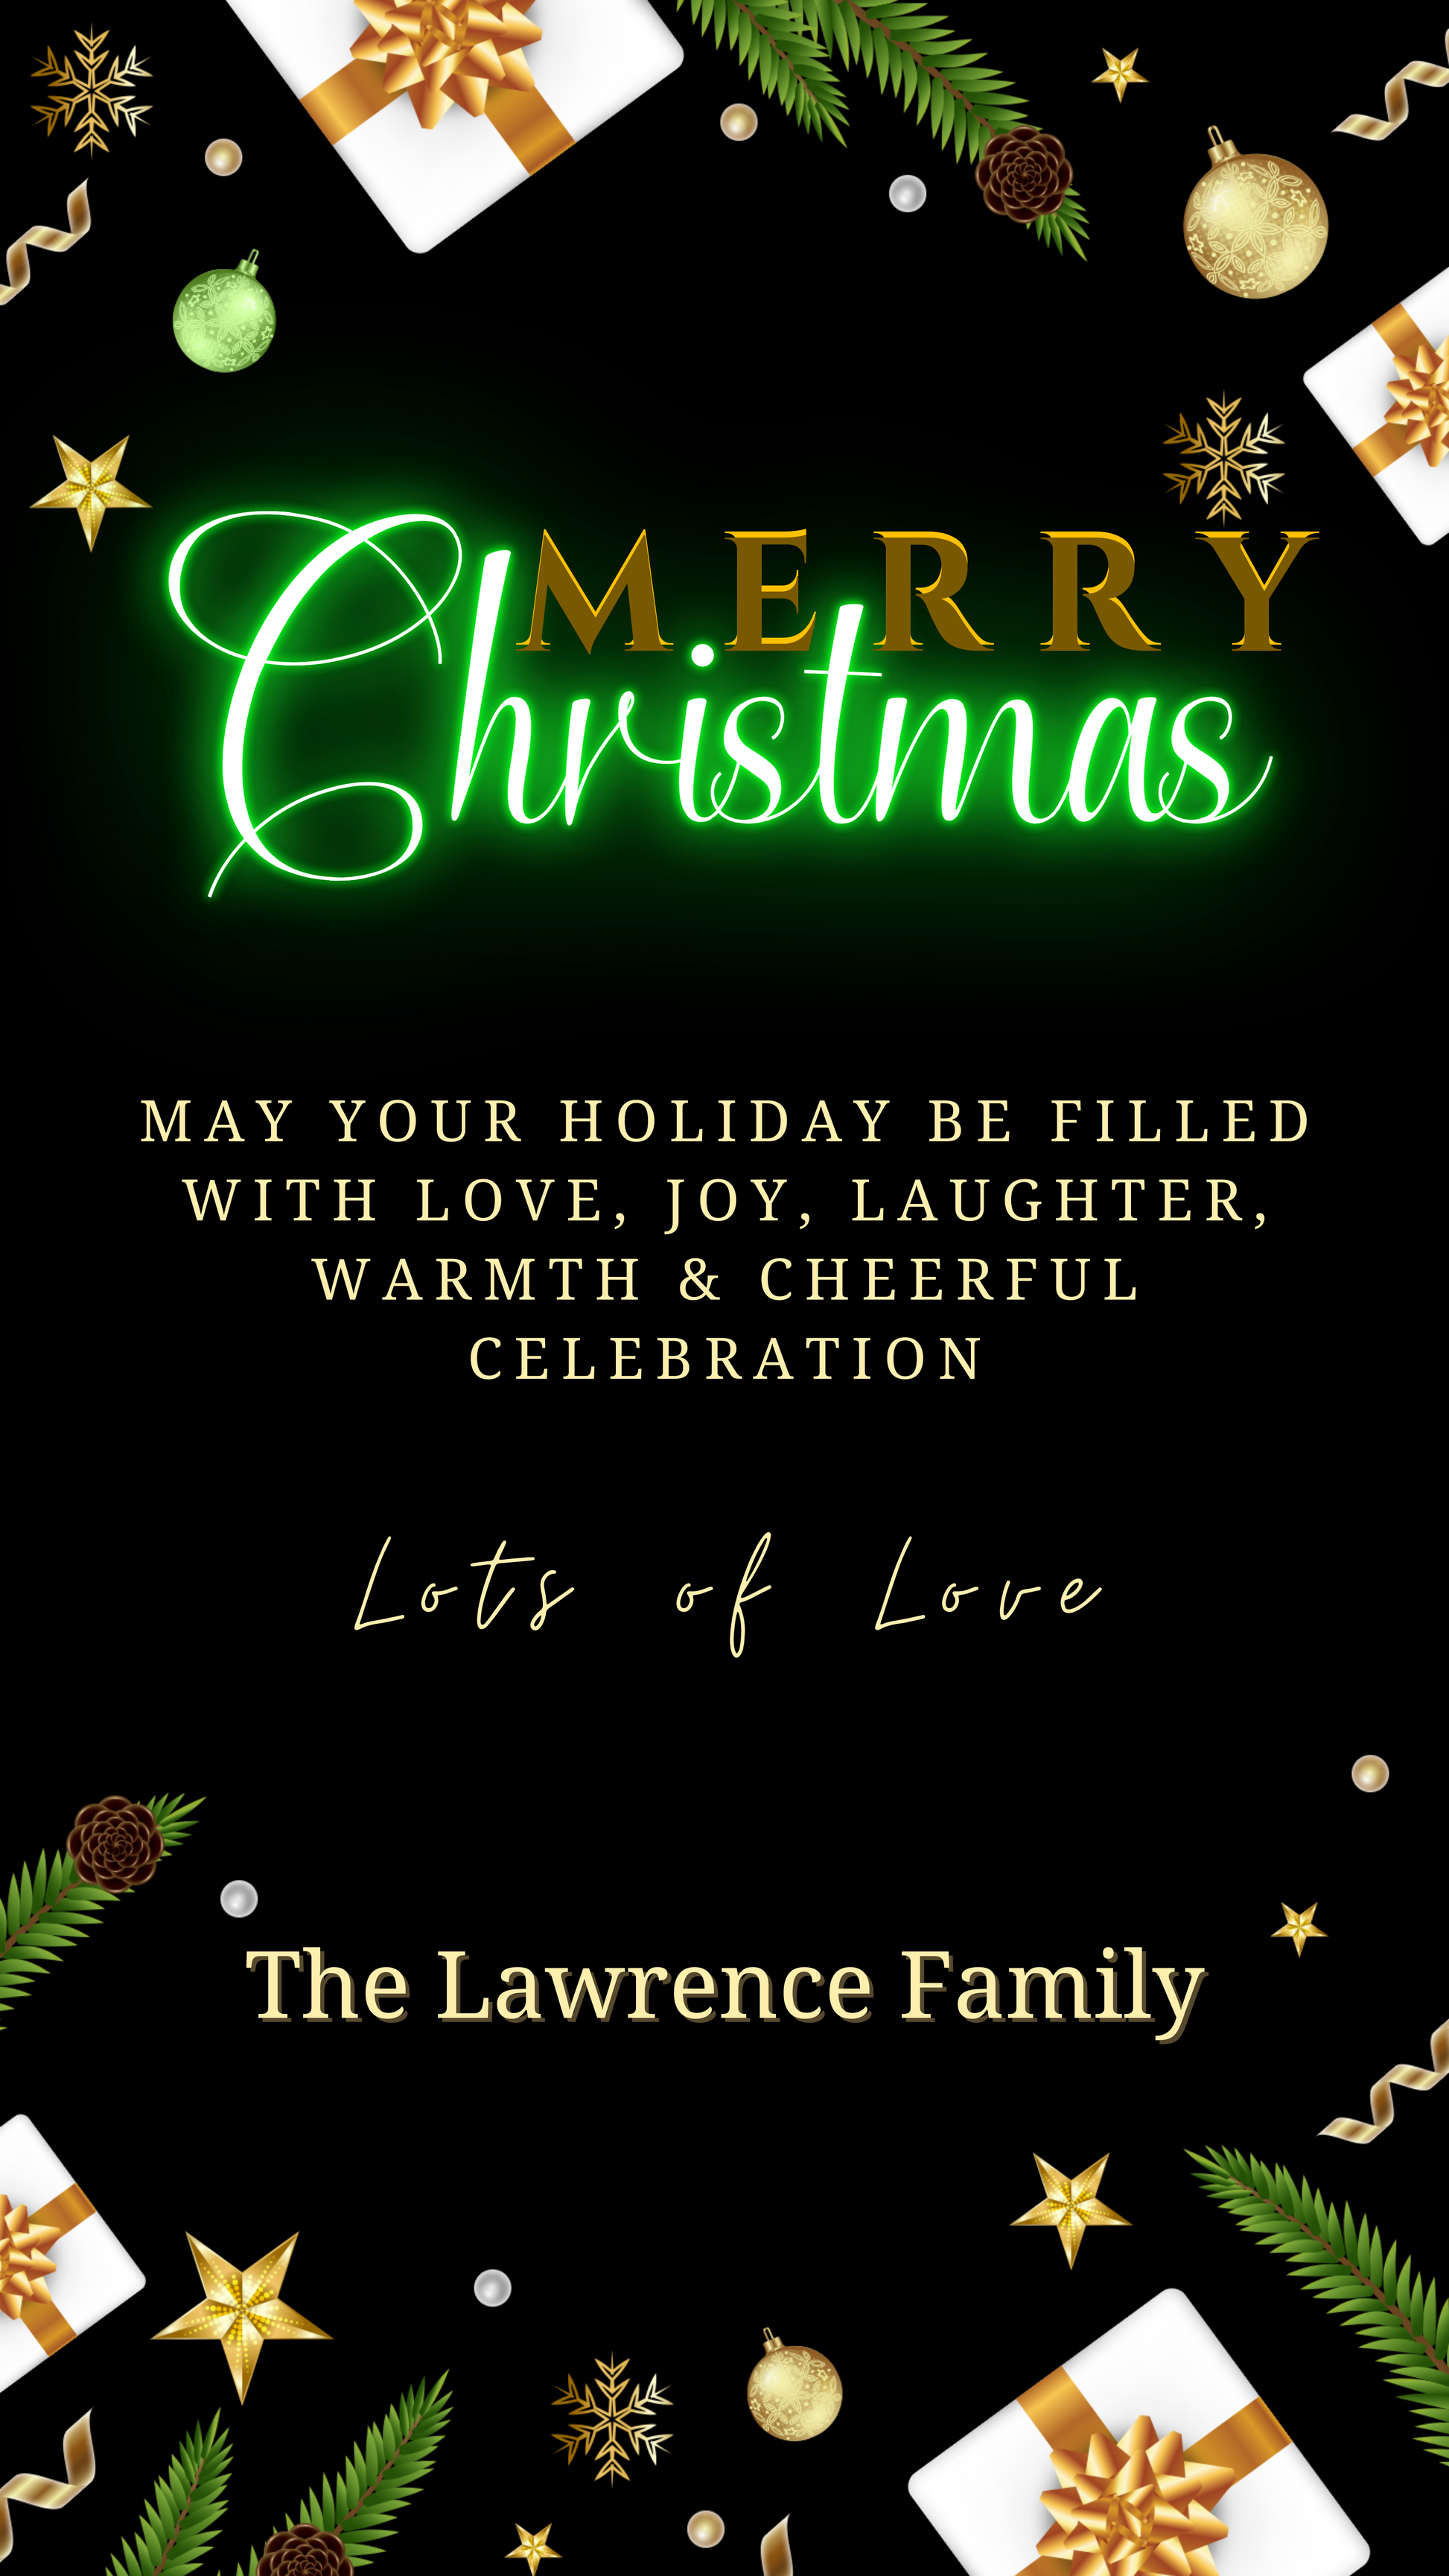 Green Neon Ornaments & Presents | Merry Christmas Ecard featuring editable text, gold bow, and holiday designs for customizable digital invitations via Canva.